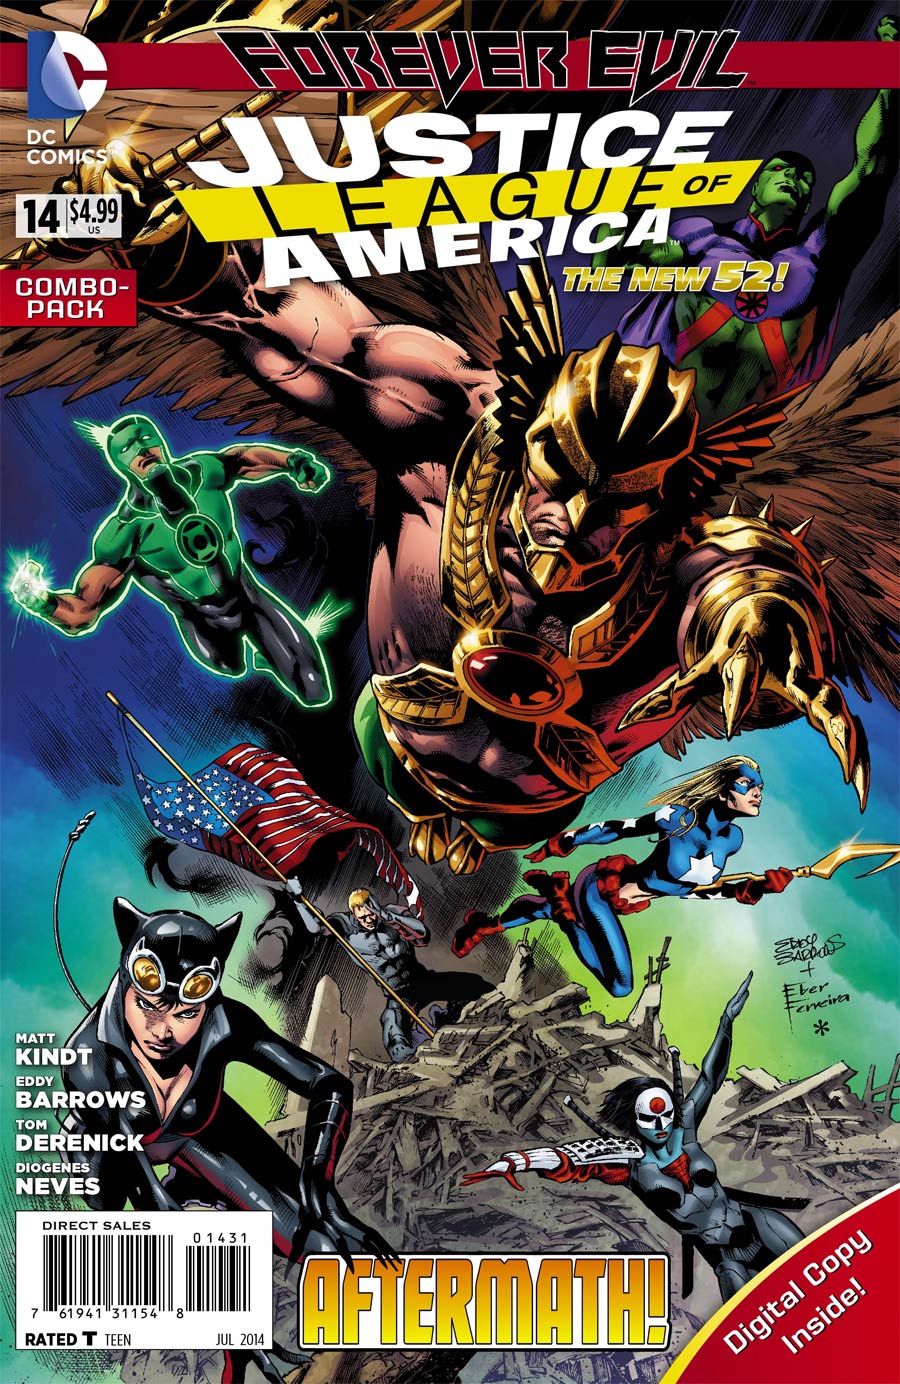 Justice League Of America Vol 3 #14 Cover C Combo Pack Without Polybag (Forever Evil Aftermath)